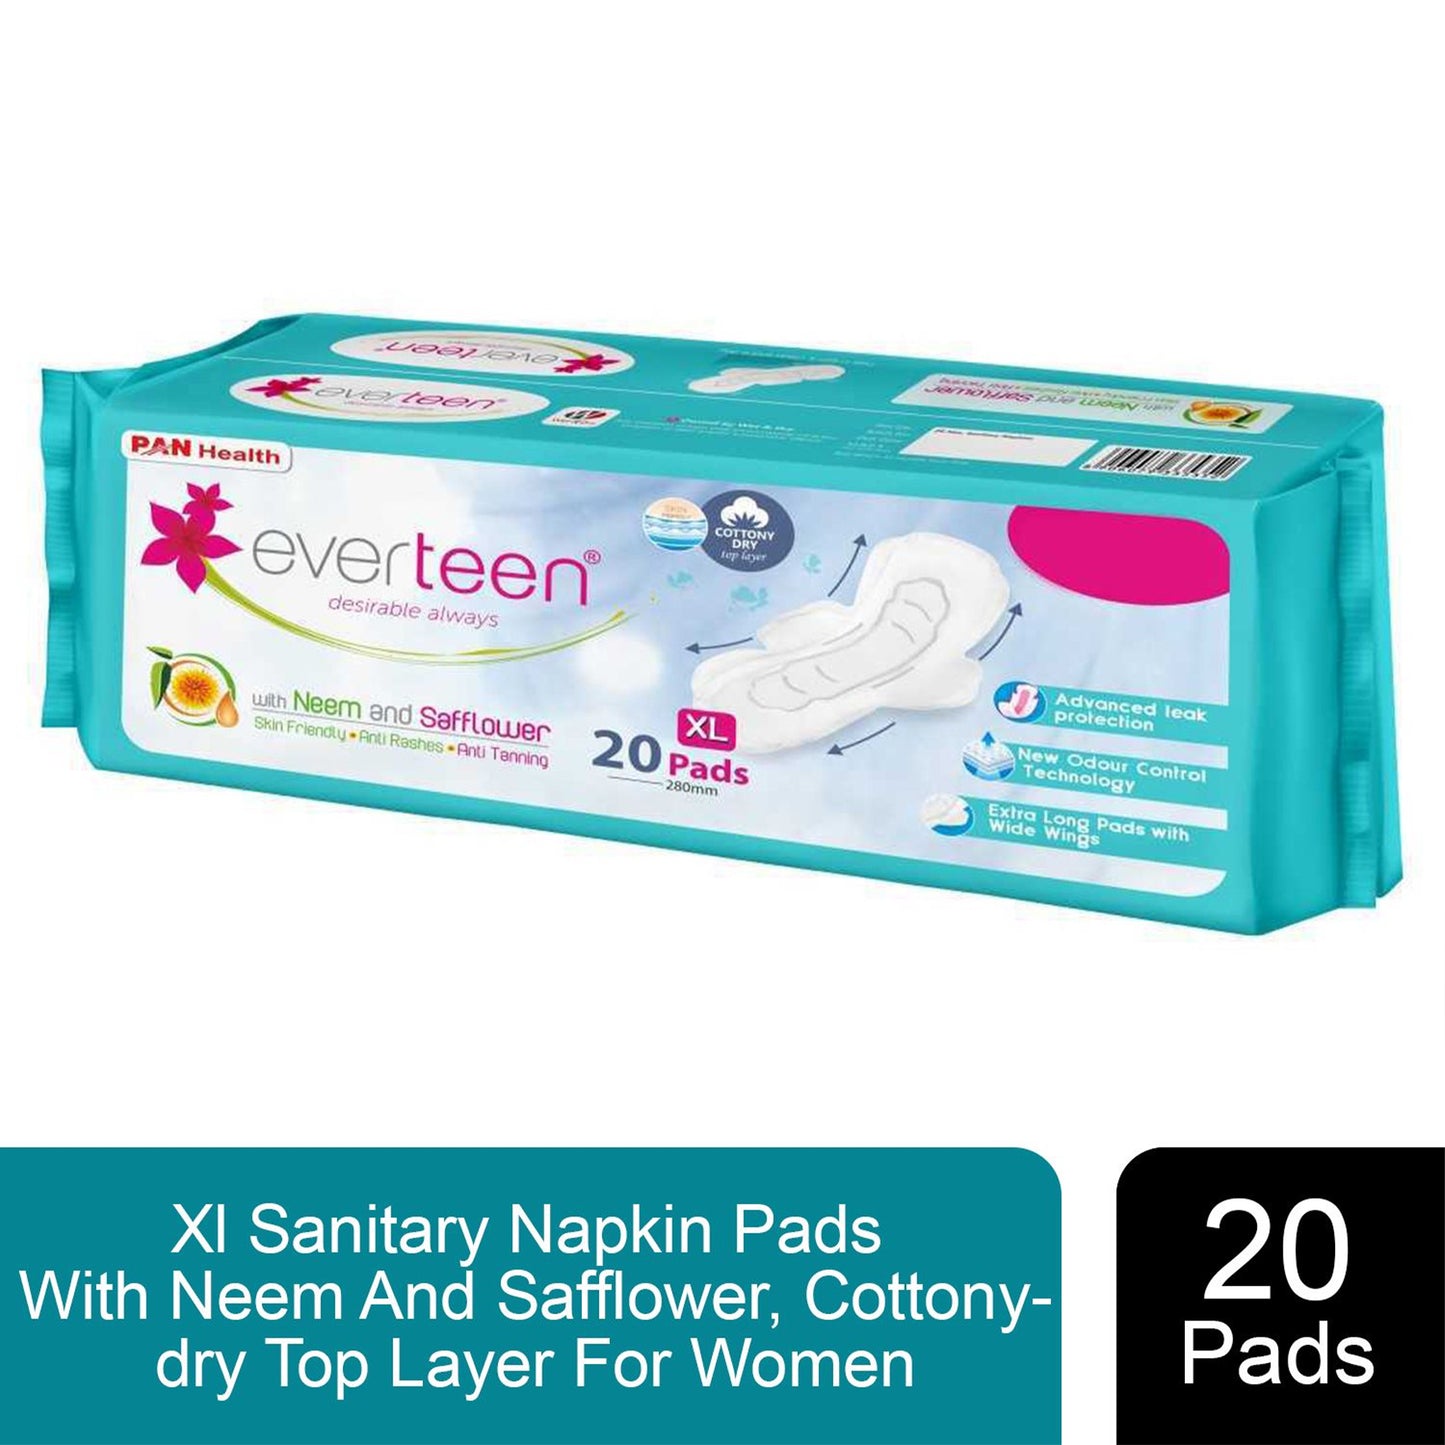 everteen XL Sanitary Napkin Pads with Neem and Safflower Cottony-Dry Top Layer, 40 Pieces